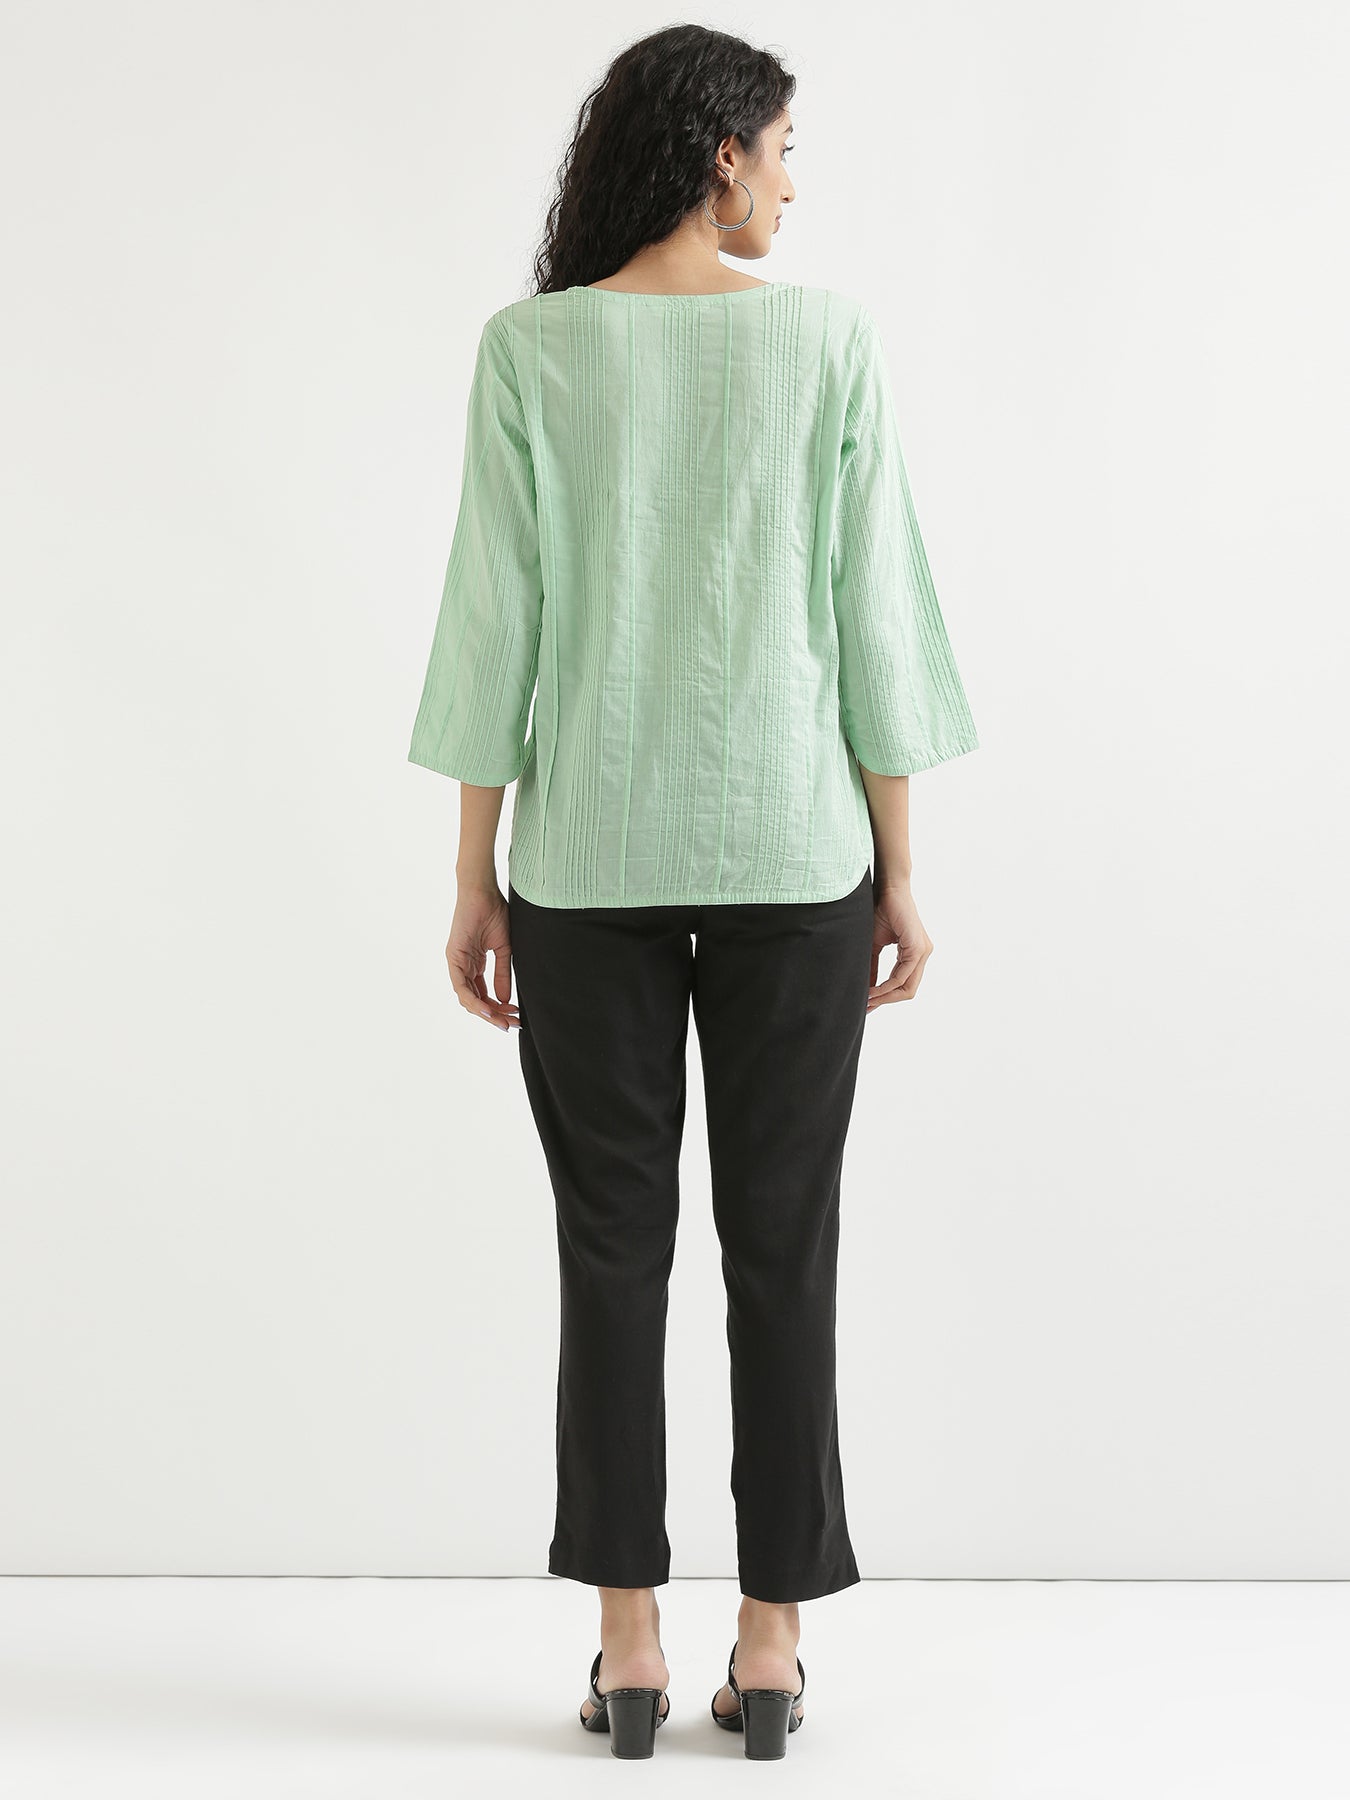 Mint Green Everyday Cotton Top